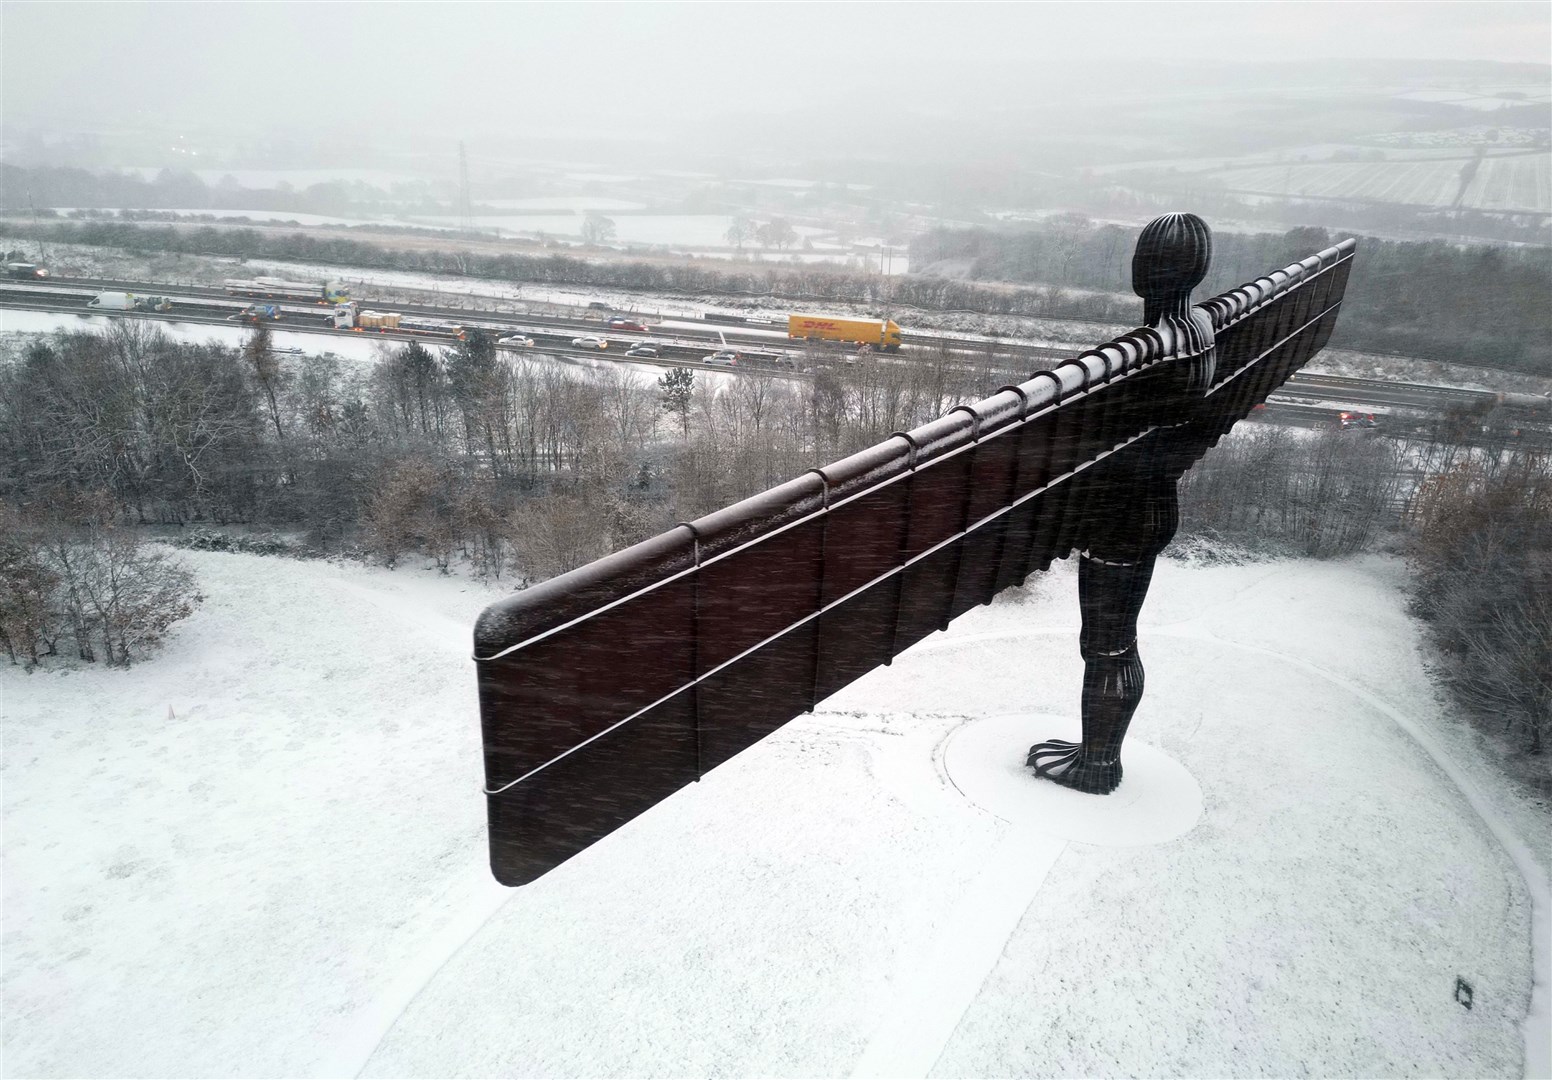 The Angel of the North statue in Gateshead covered in snow (Owen Humphreys/PA).